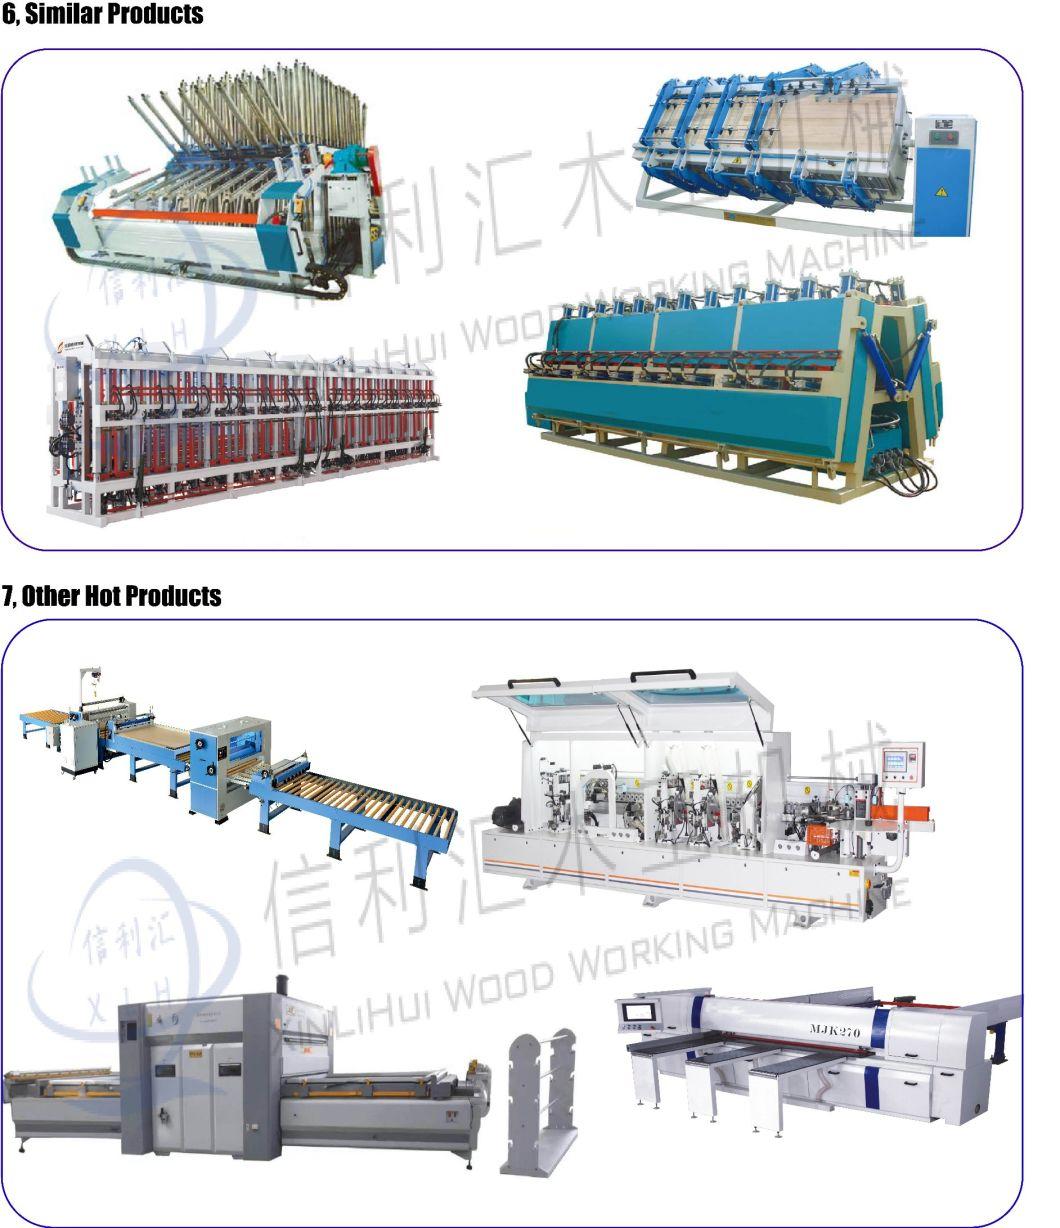 Wooden Plate Plying Machines / Jointing Machine/Air Wood Press Machine/ Soild Wood Hydraulic Composer Prices Hydraulic Wood Press